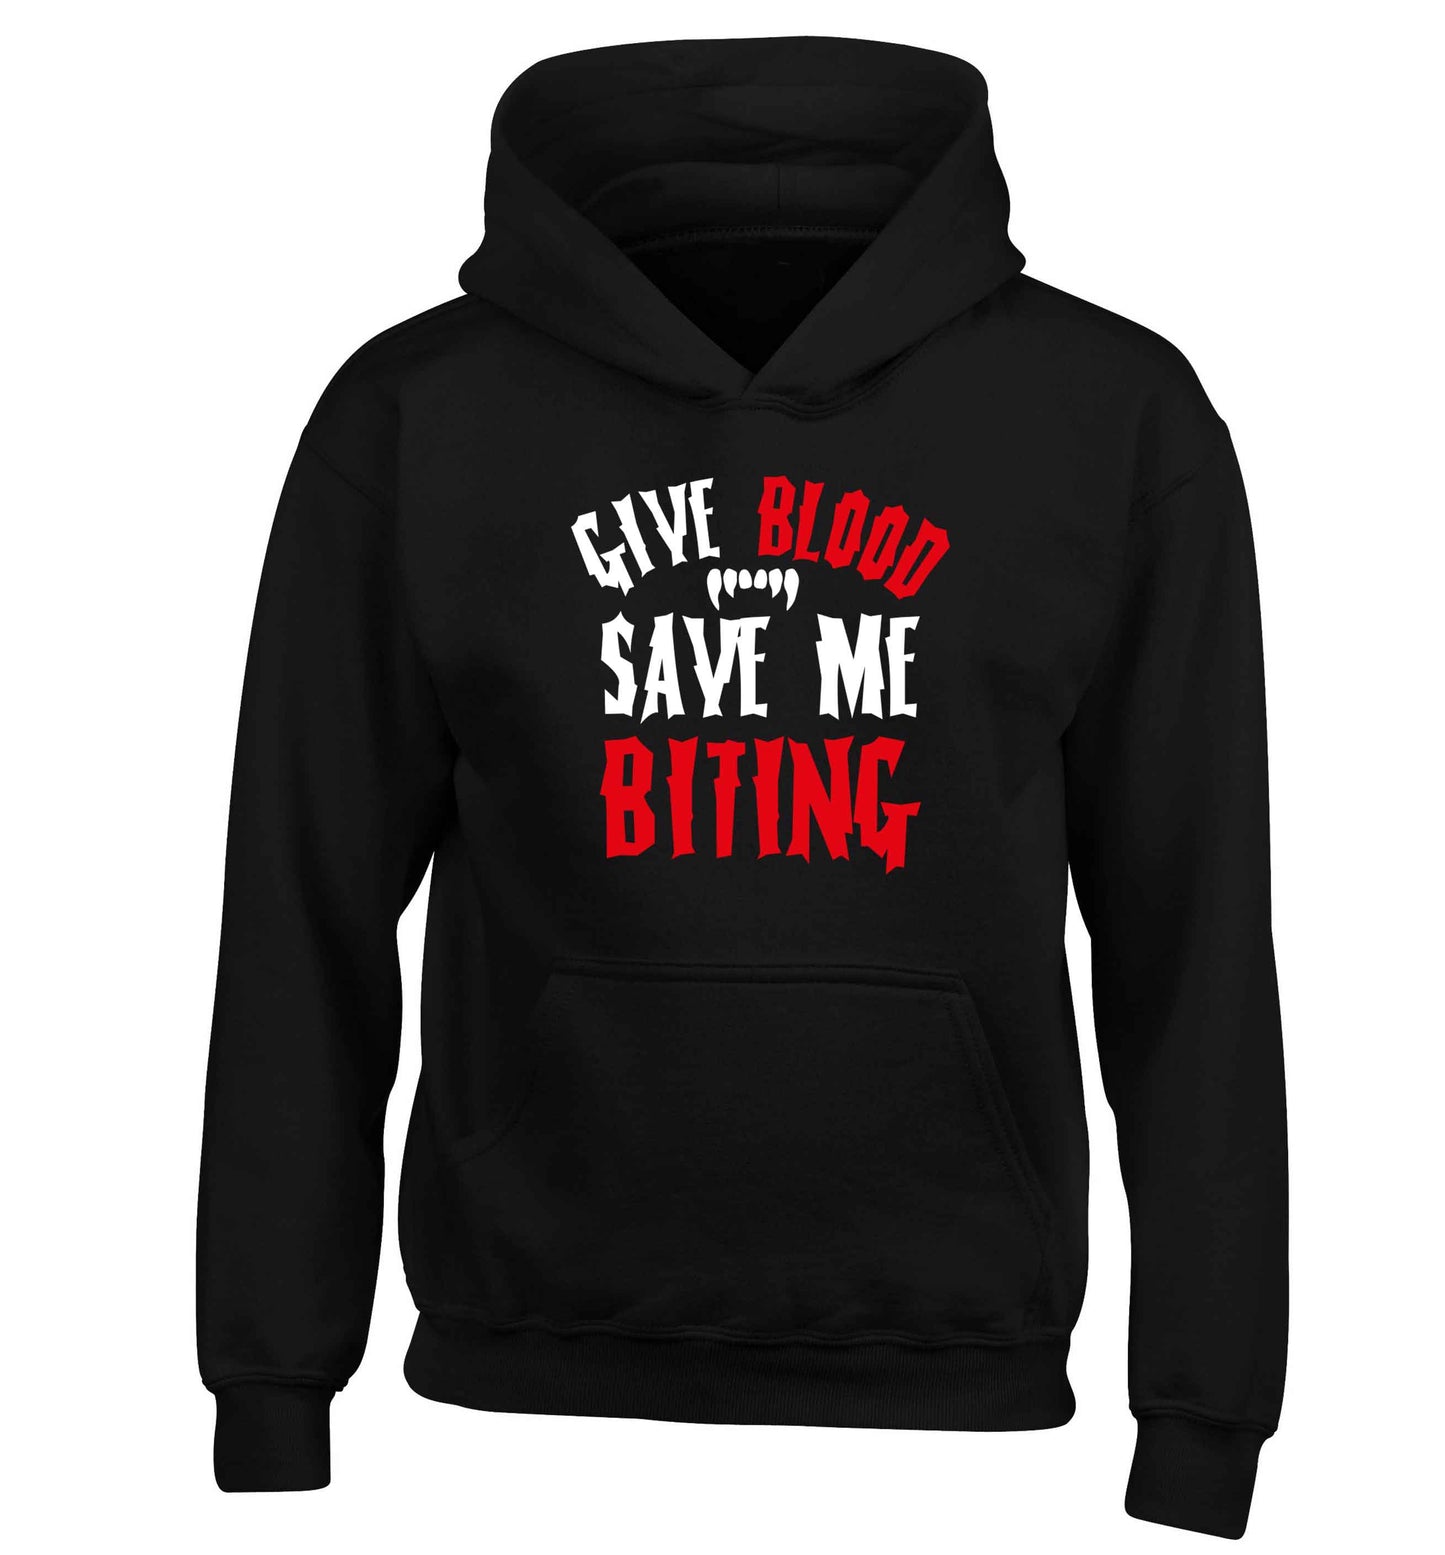 Give blood save me biting children's black hoodie 12-13 Years